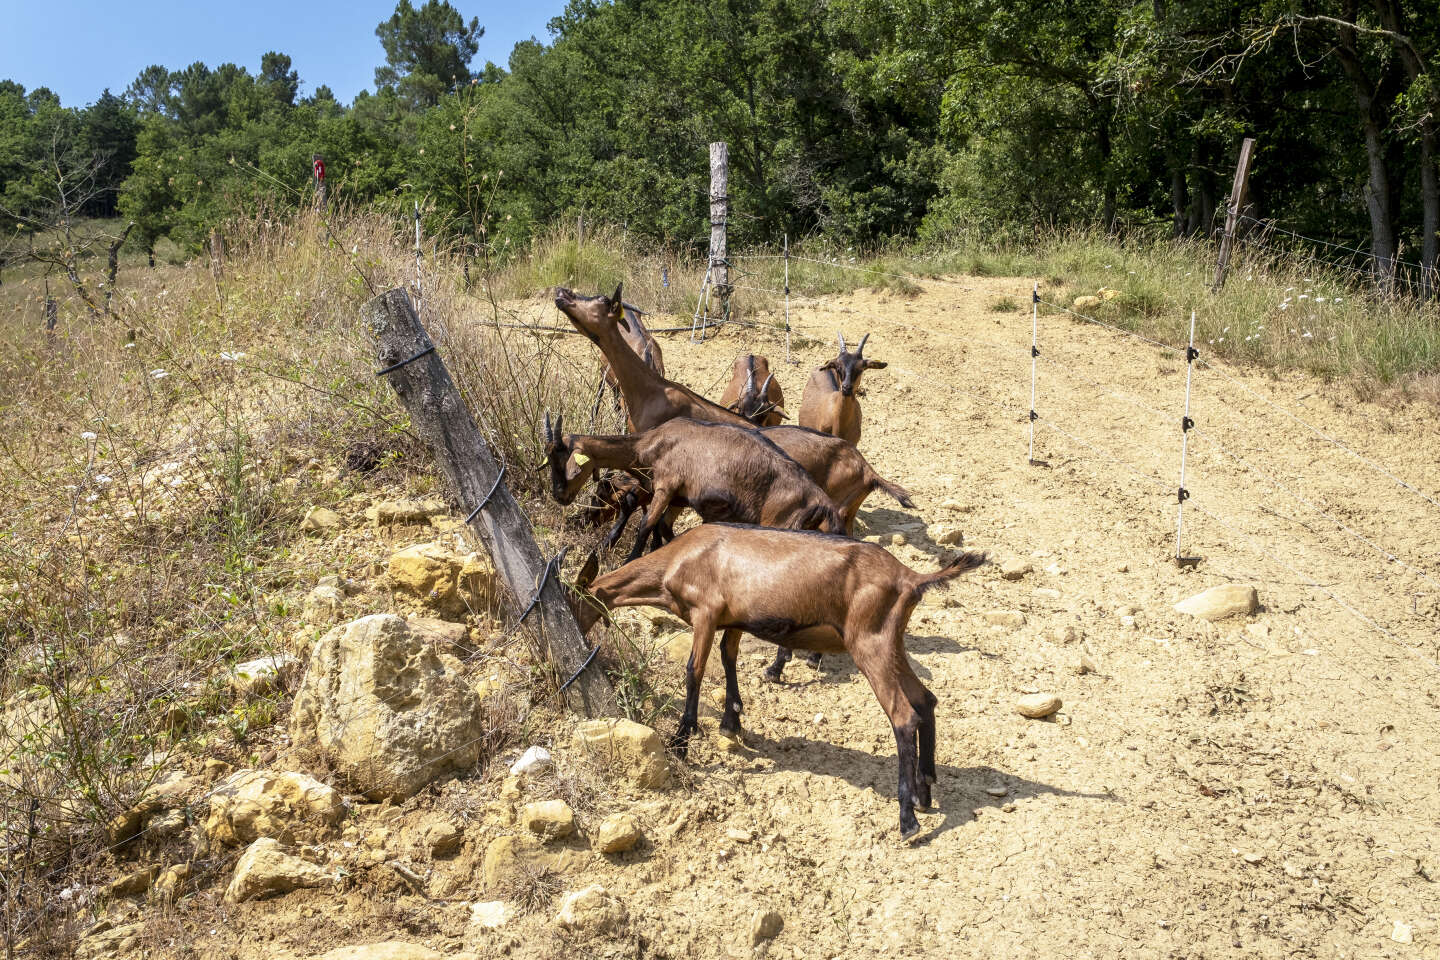 In the Corbières massif, the goats of discord